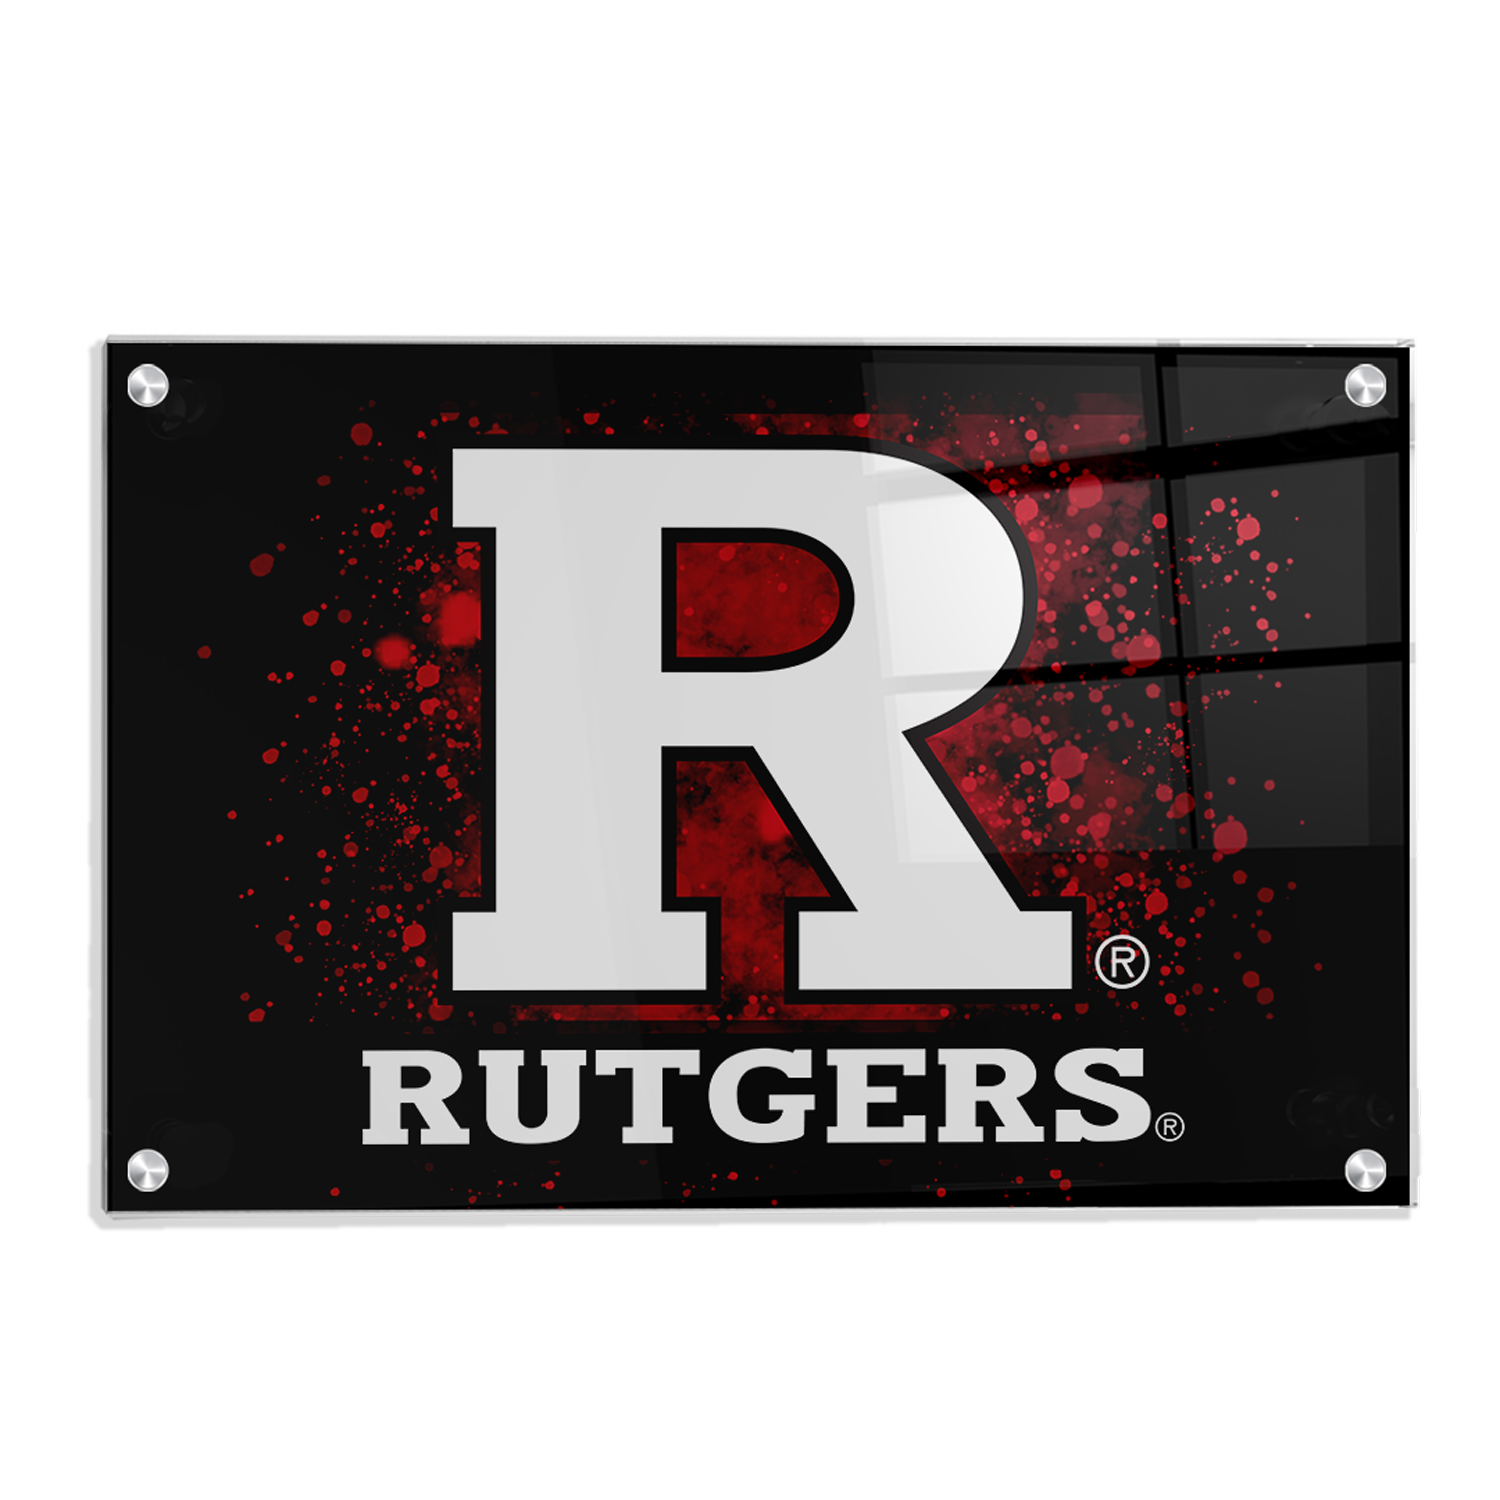 Rutgers Scarlet Knights - Rutgers R - College Wall Art #Canvas